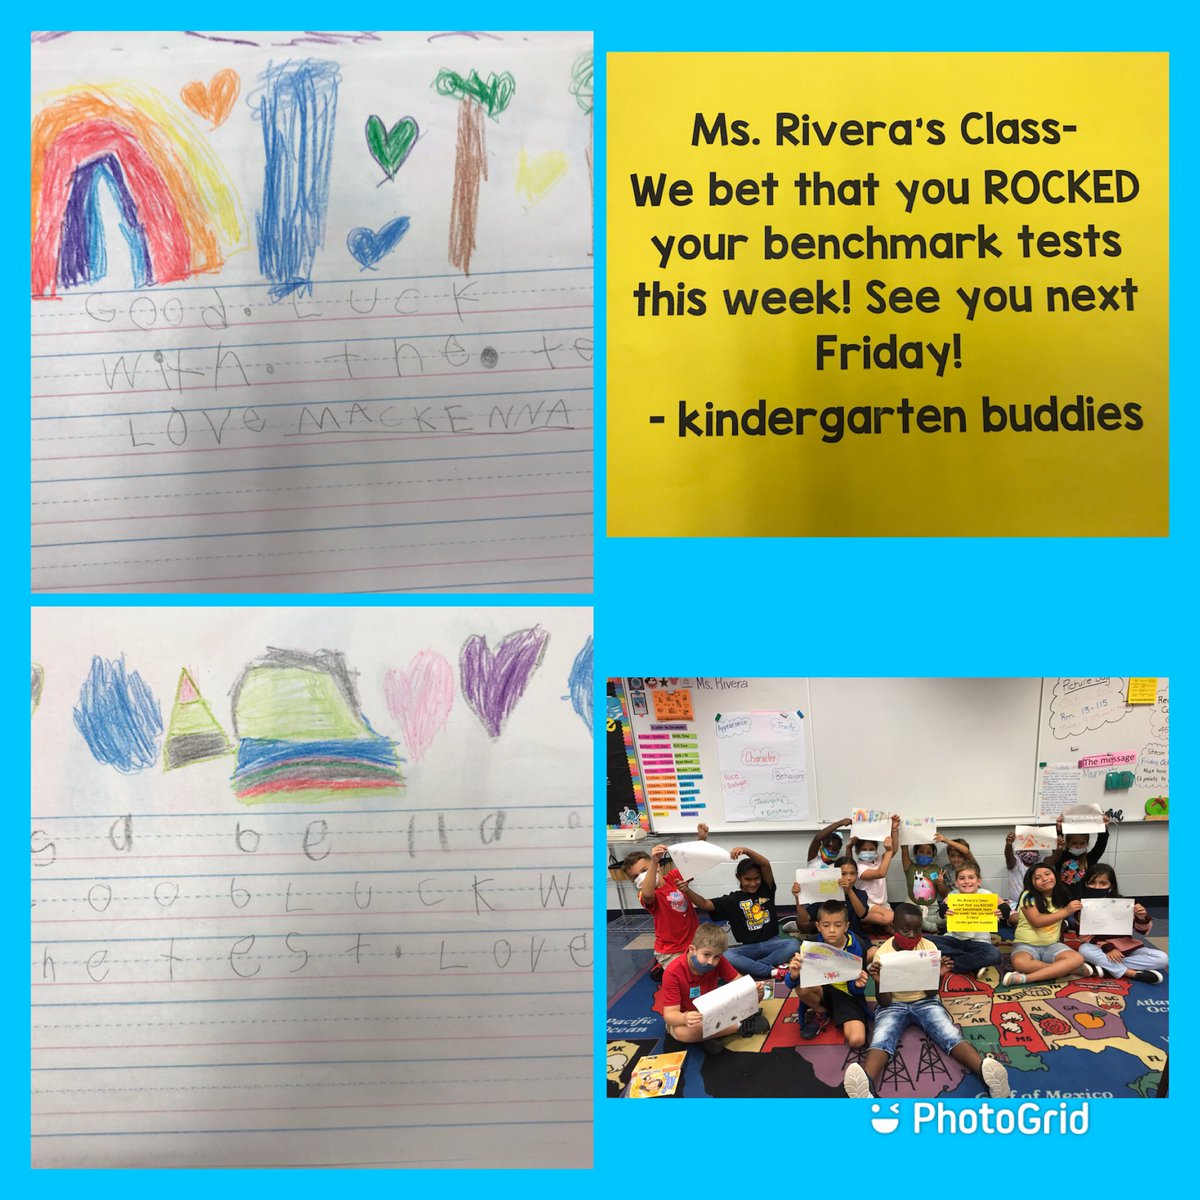 So thankful to our @MrsPalmerLES KinderCuties #BuddyClass for thinking of us during benchmark testing! @LelyLionsRoar #LelyLeaders We loved all of their letters! @collierschools #LeadByExample #LeadWithLove #OnOurWaytotheTop